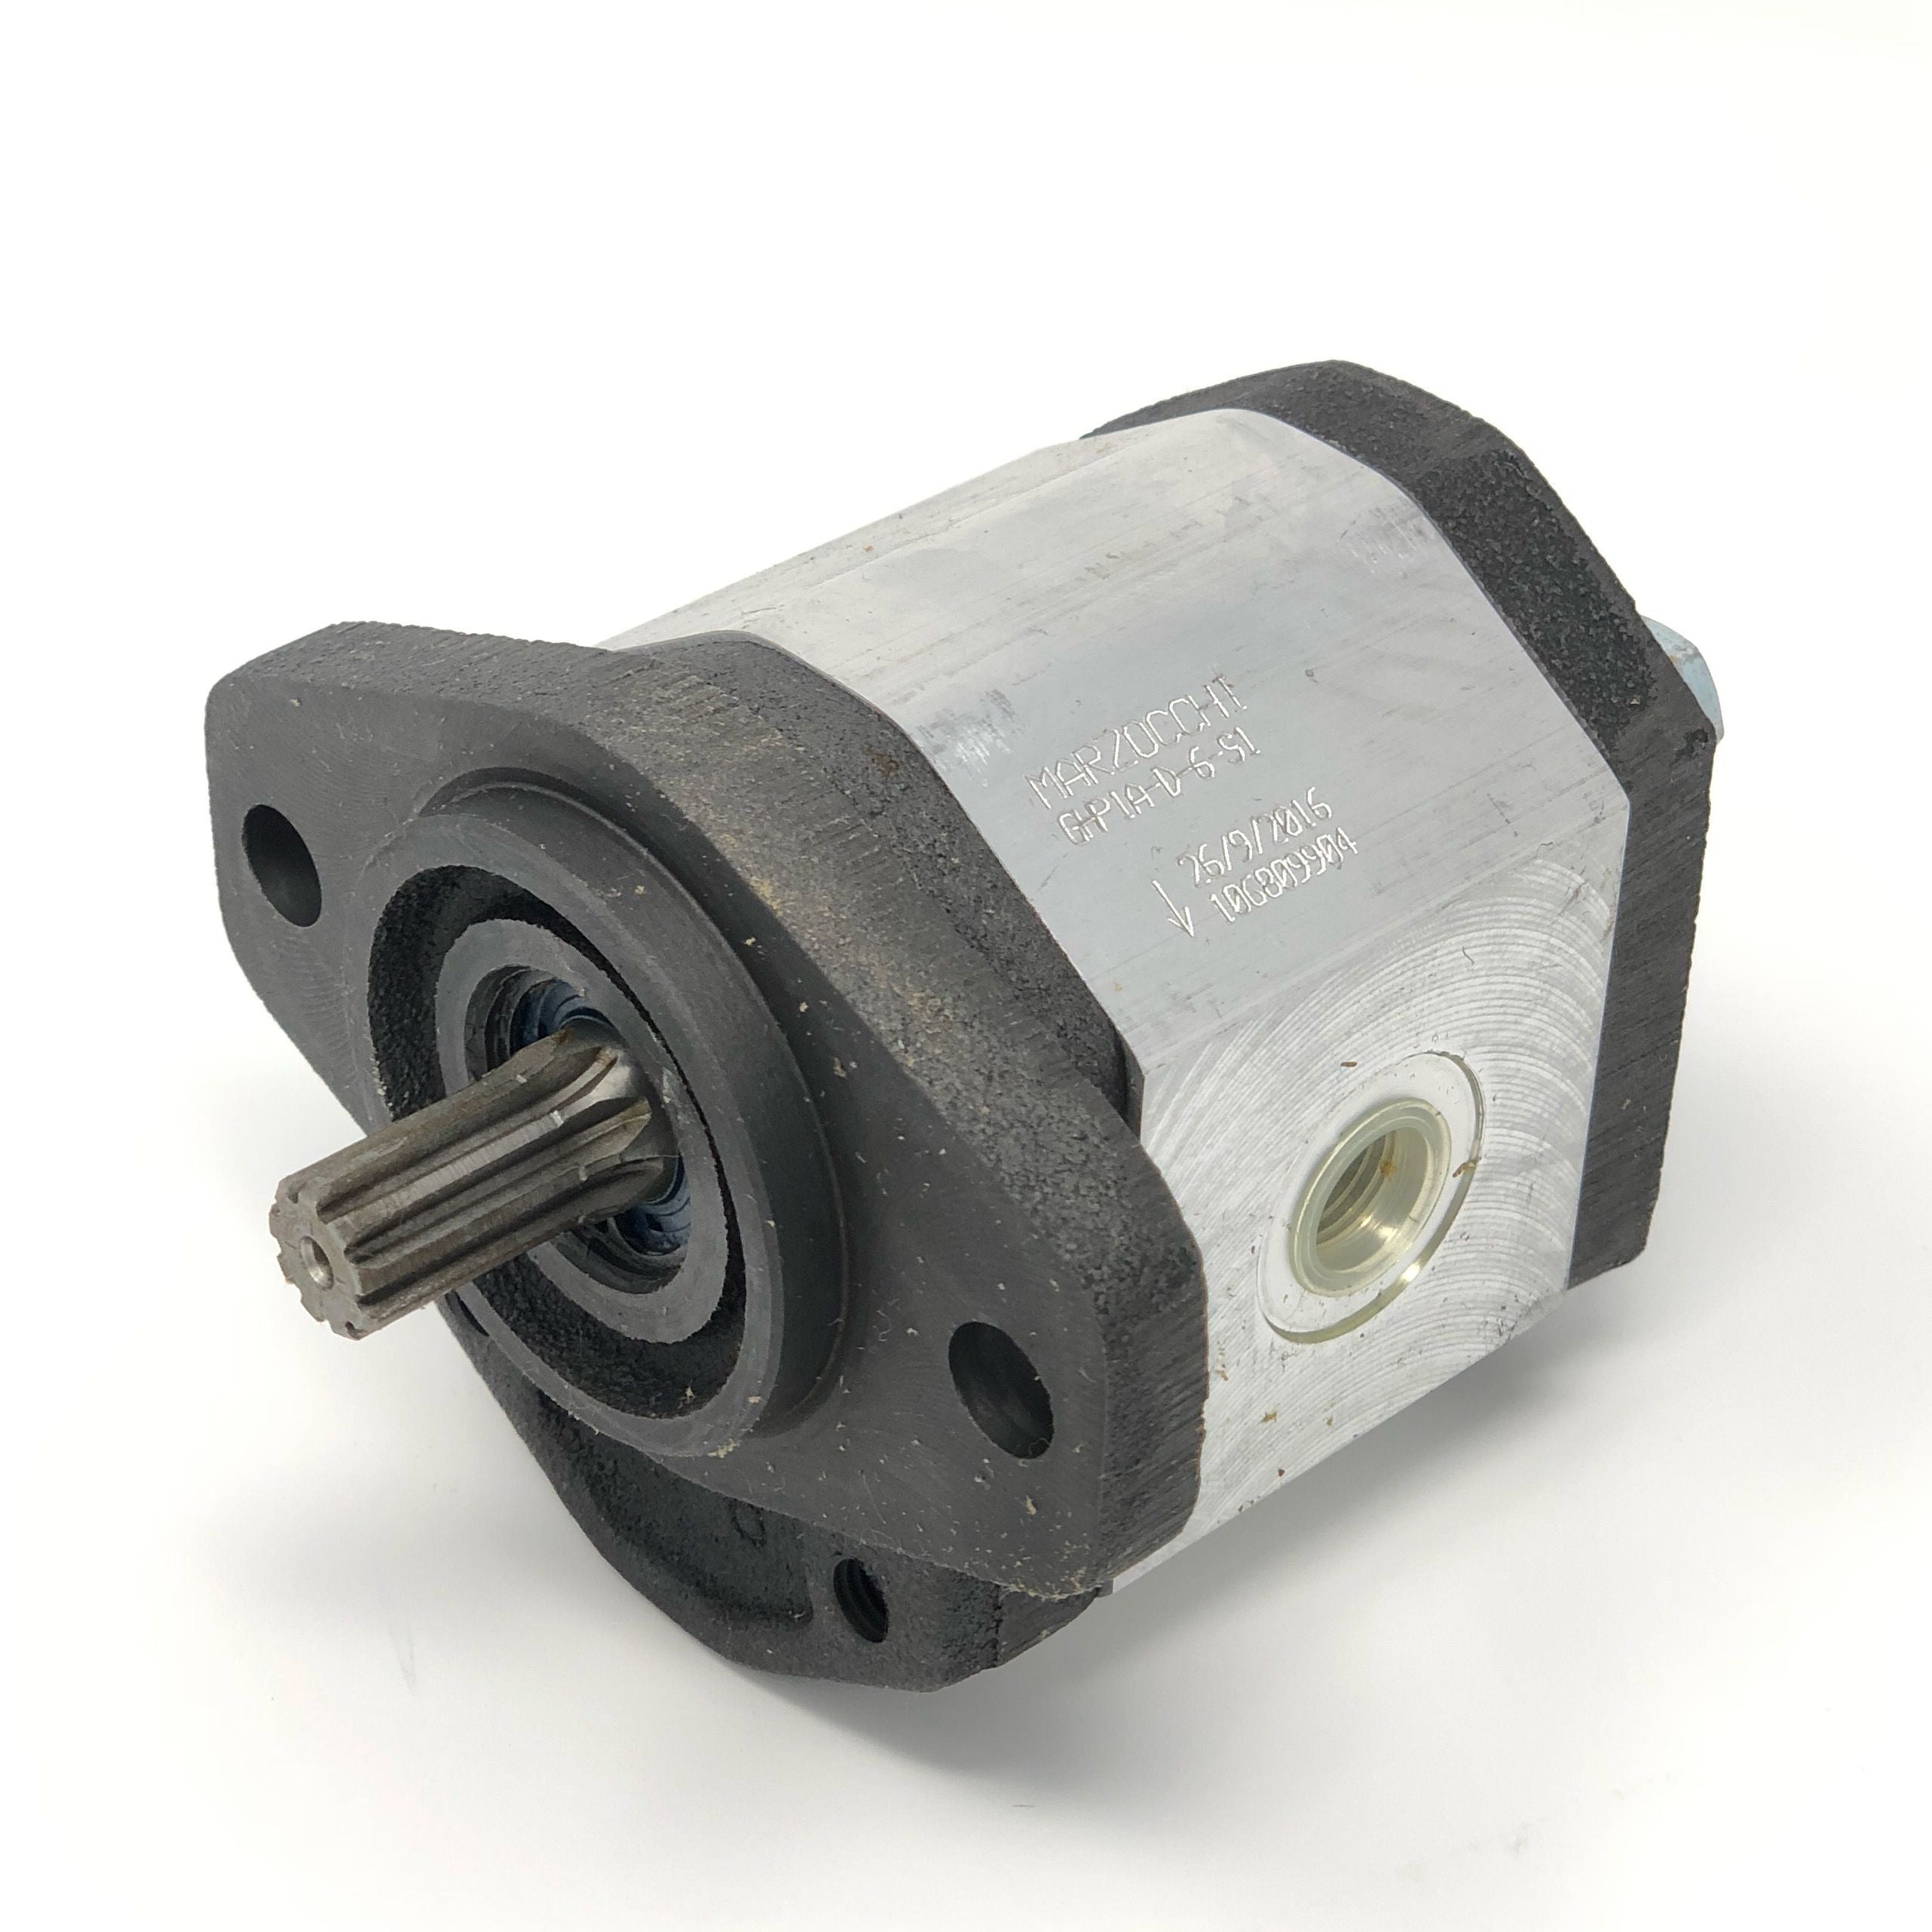 GHP1A-S-4-S1 : Marzocchi Gear Pump, CCW, 2.8cc (0.1708in3), 1.33 GPM, 3915psi, 5000 RPM, #8 SAE (1/2") In, #6 SAE (3/8") Out, Splined Shaft 9T 20/40DP, SAE AA 2-Bolt Mount